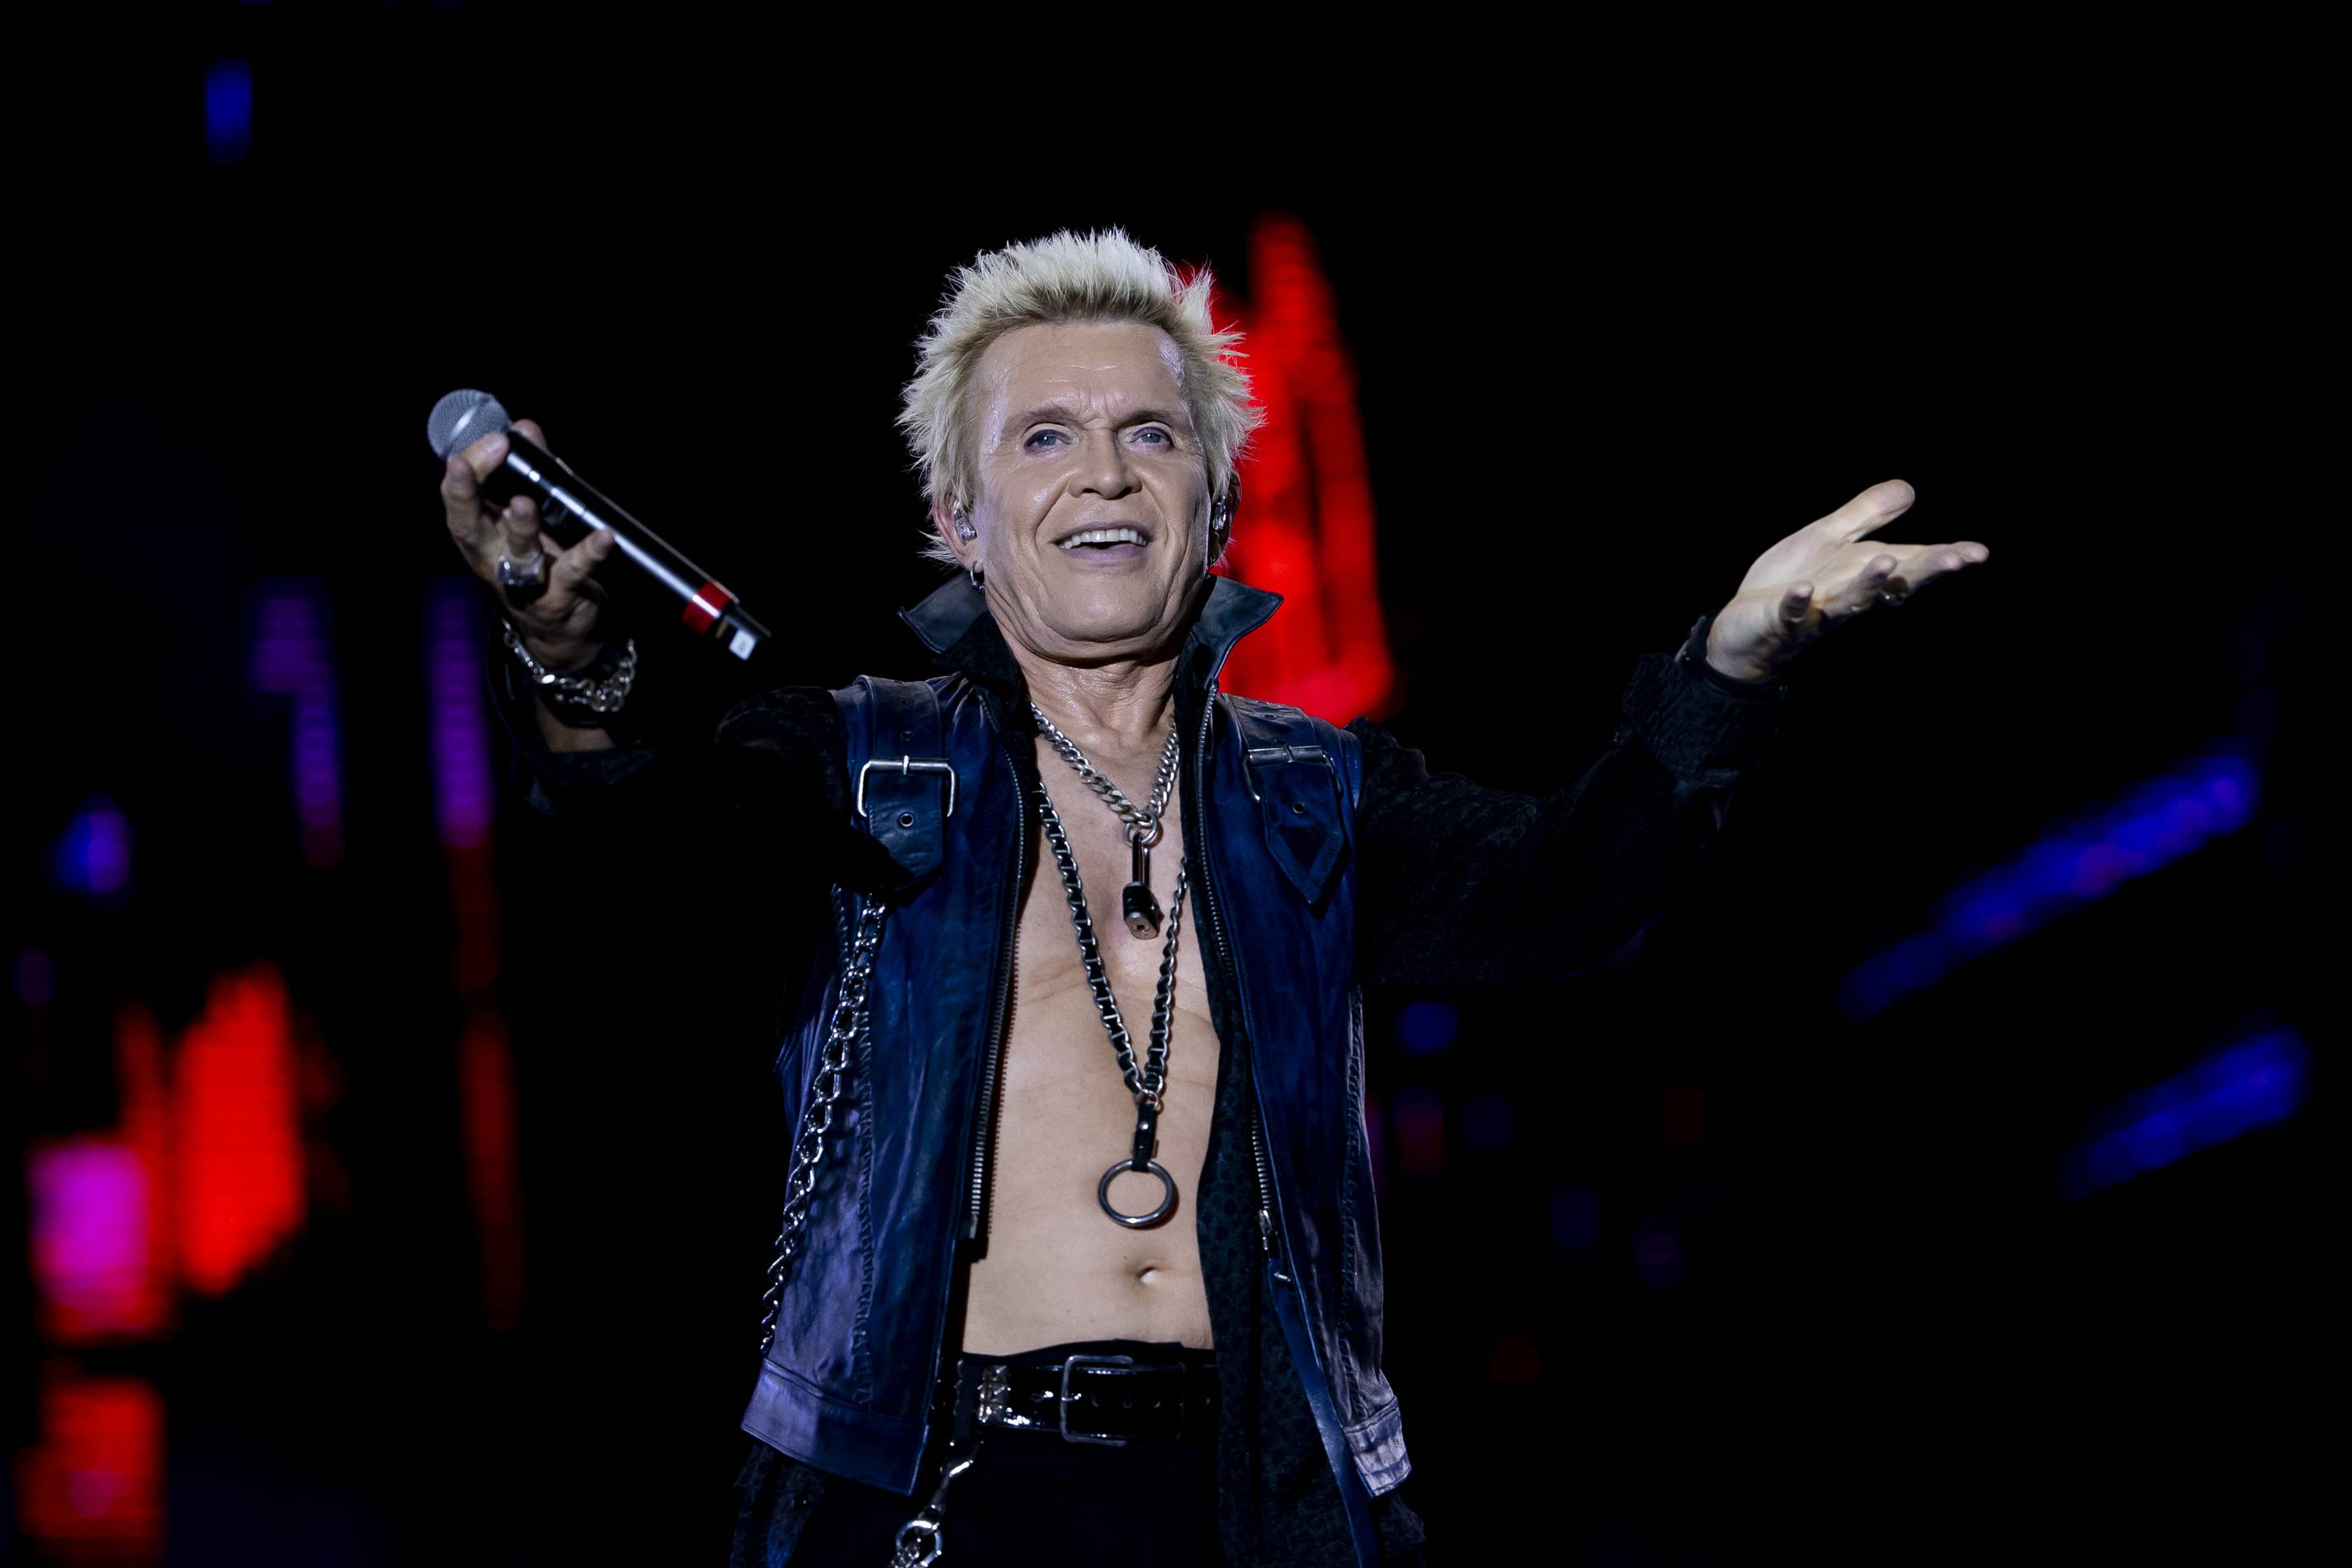 Rocker Billy Idol Heads To The Hoover Dam For An Exclusive Concert